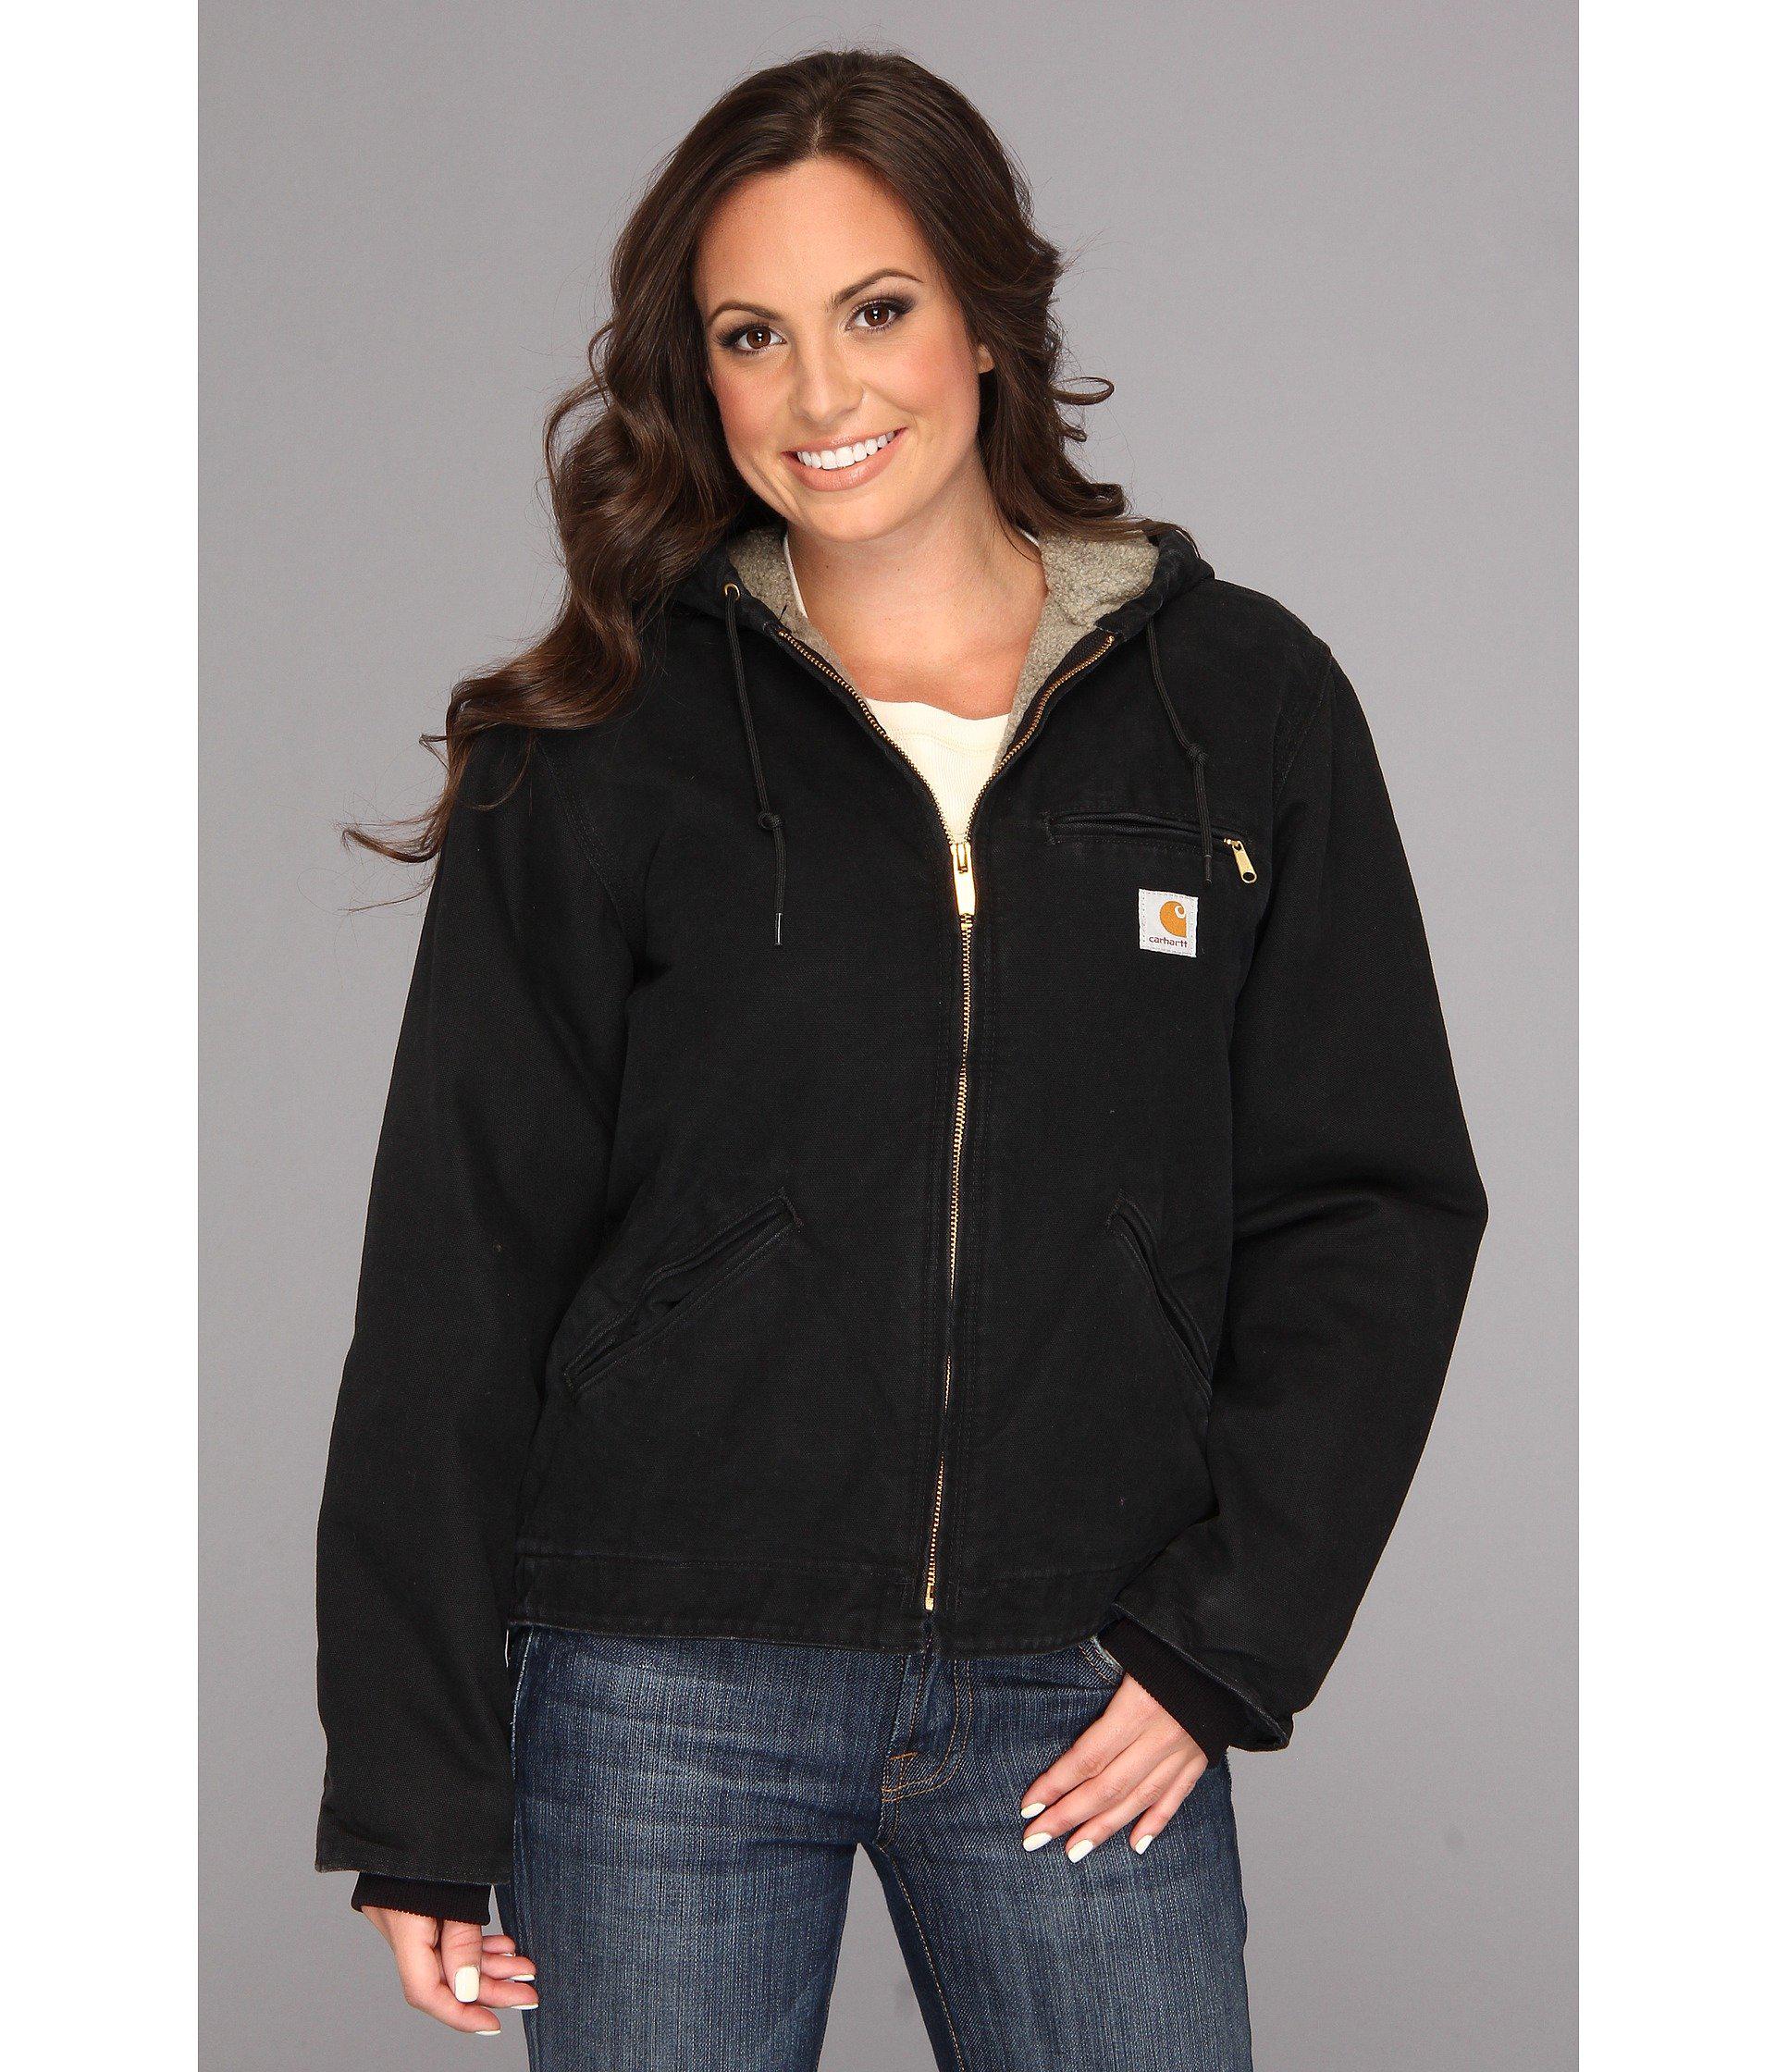 Purchase > carhartt sandstone sierra jacket womens, Up to 69% OFF